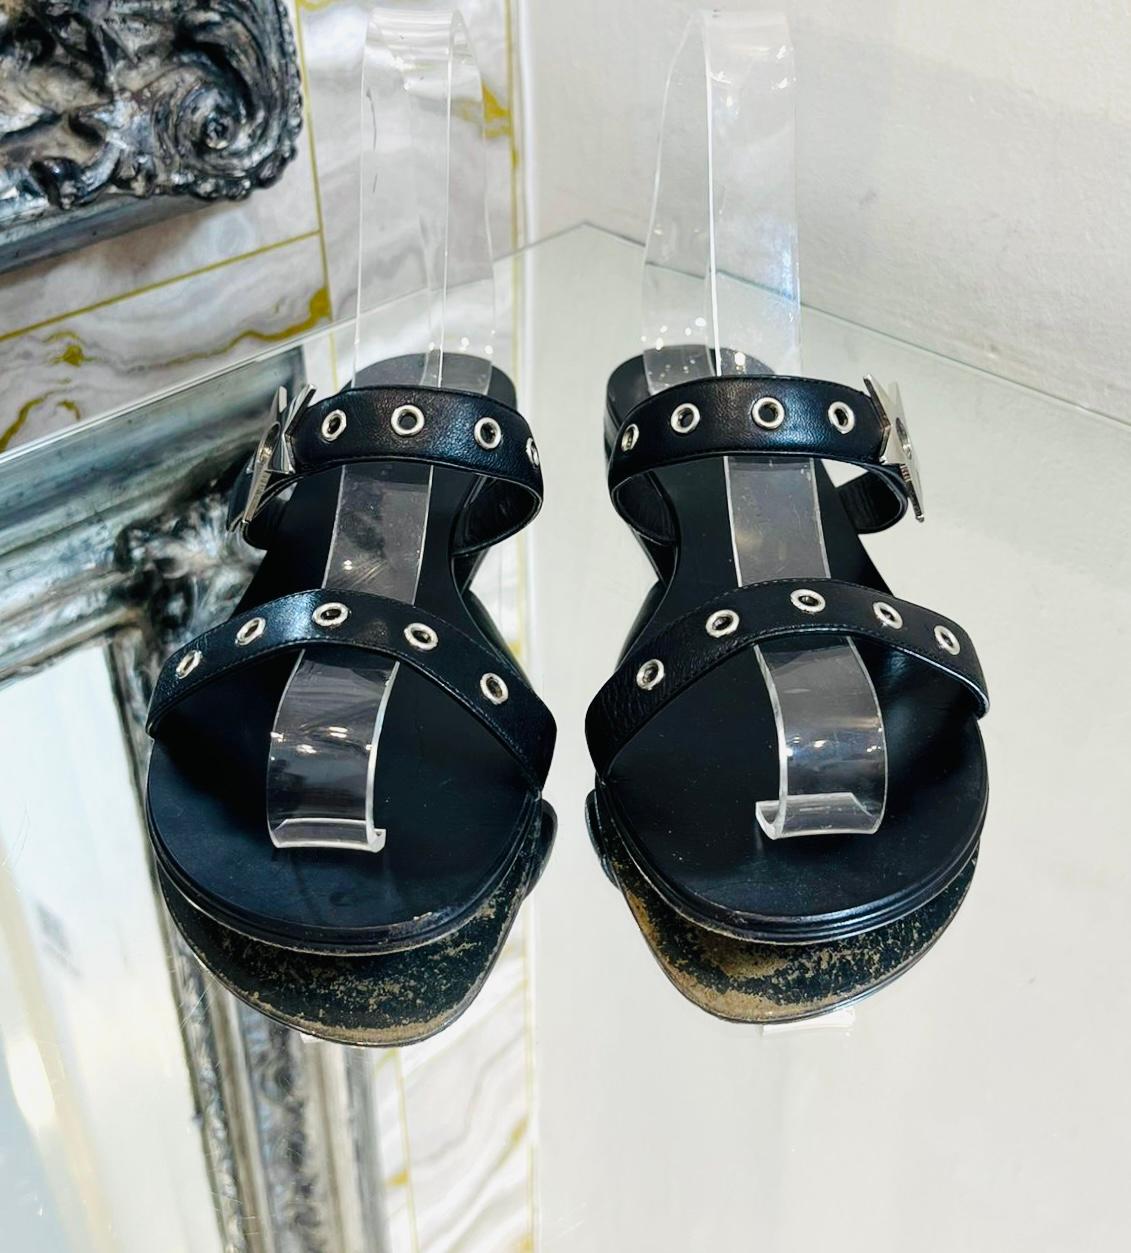 Giuseppe Zanotti Kalamity Star Embellished Leather Sandals

Black flats designed with dual straps detailed with silver eyelets.

Featuring logo engraved star decoration to the sides.

Styled with round toe and leather soles.

Size – 37

Condition –